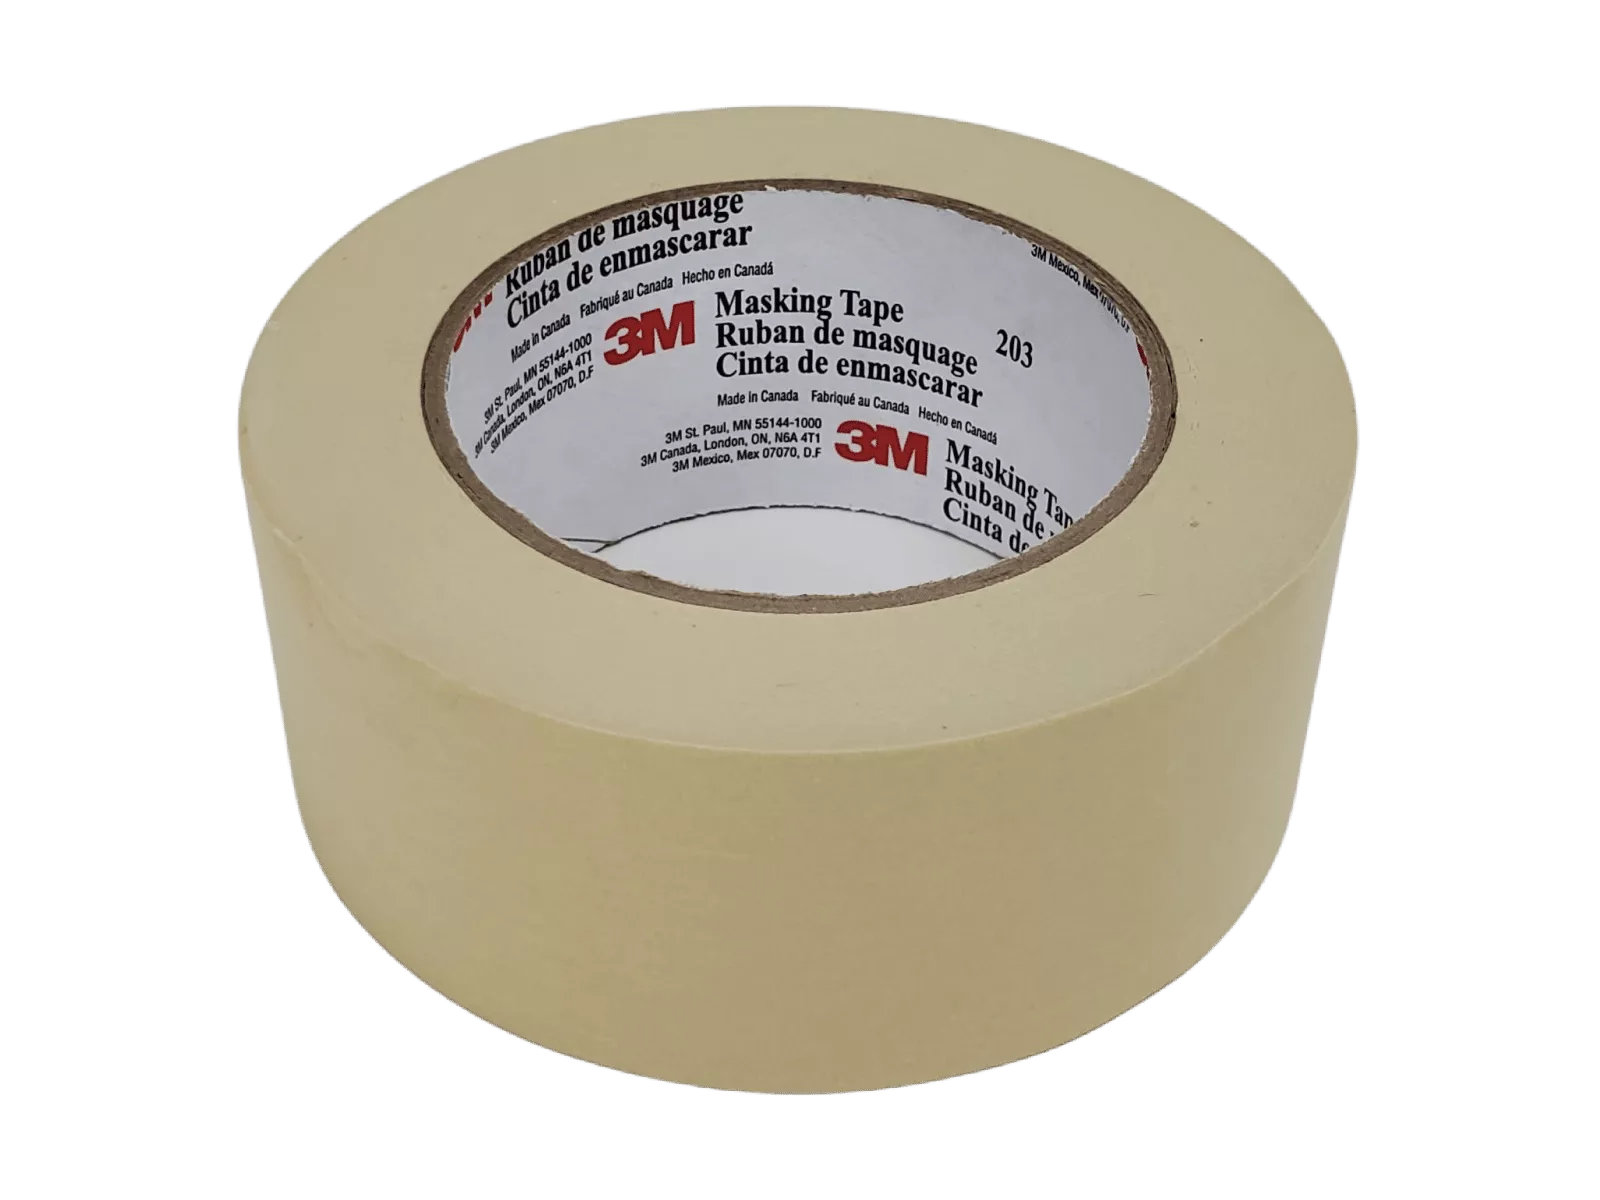 High-quality masking tape, 2in width, ensuring clean and precise edges during bedliner application.